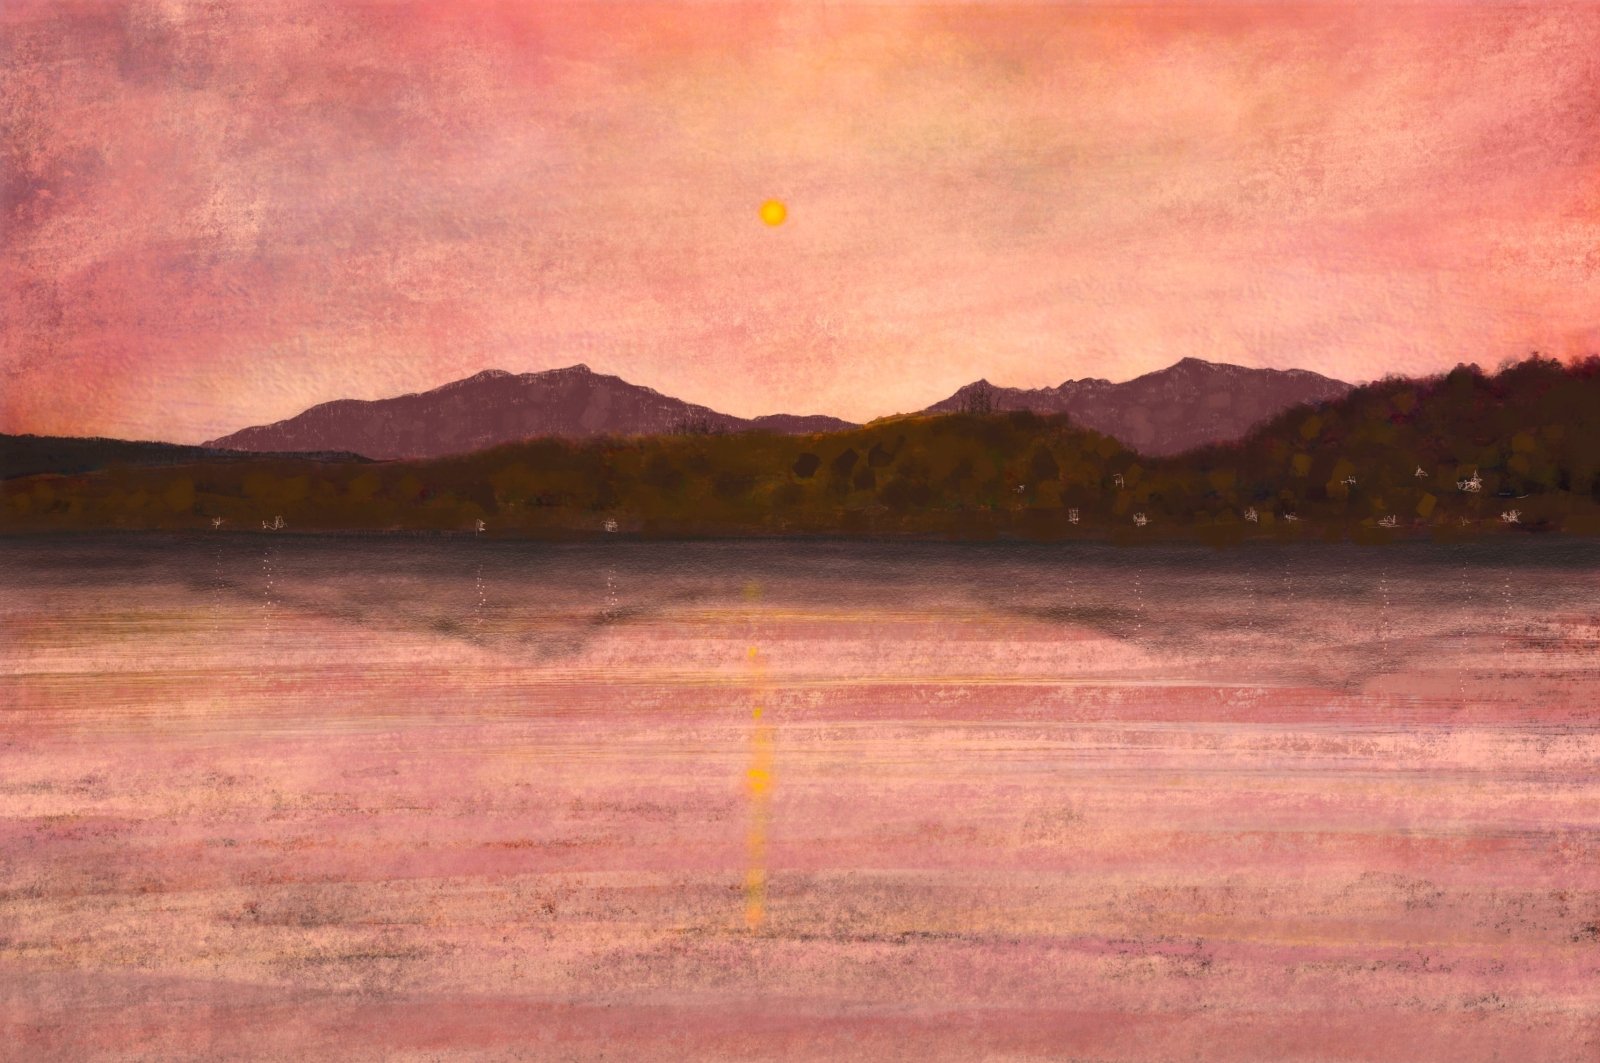 Arran And Bute Dusk-Signed Art Prints By Scottish Artist Hunter-Arran Art Gallery-Paintings, Prints, Homeware, Art Gifts From Scotland By Scottish Artist Kevin Hunter